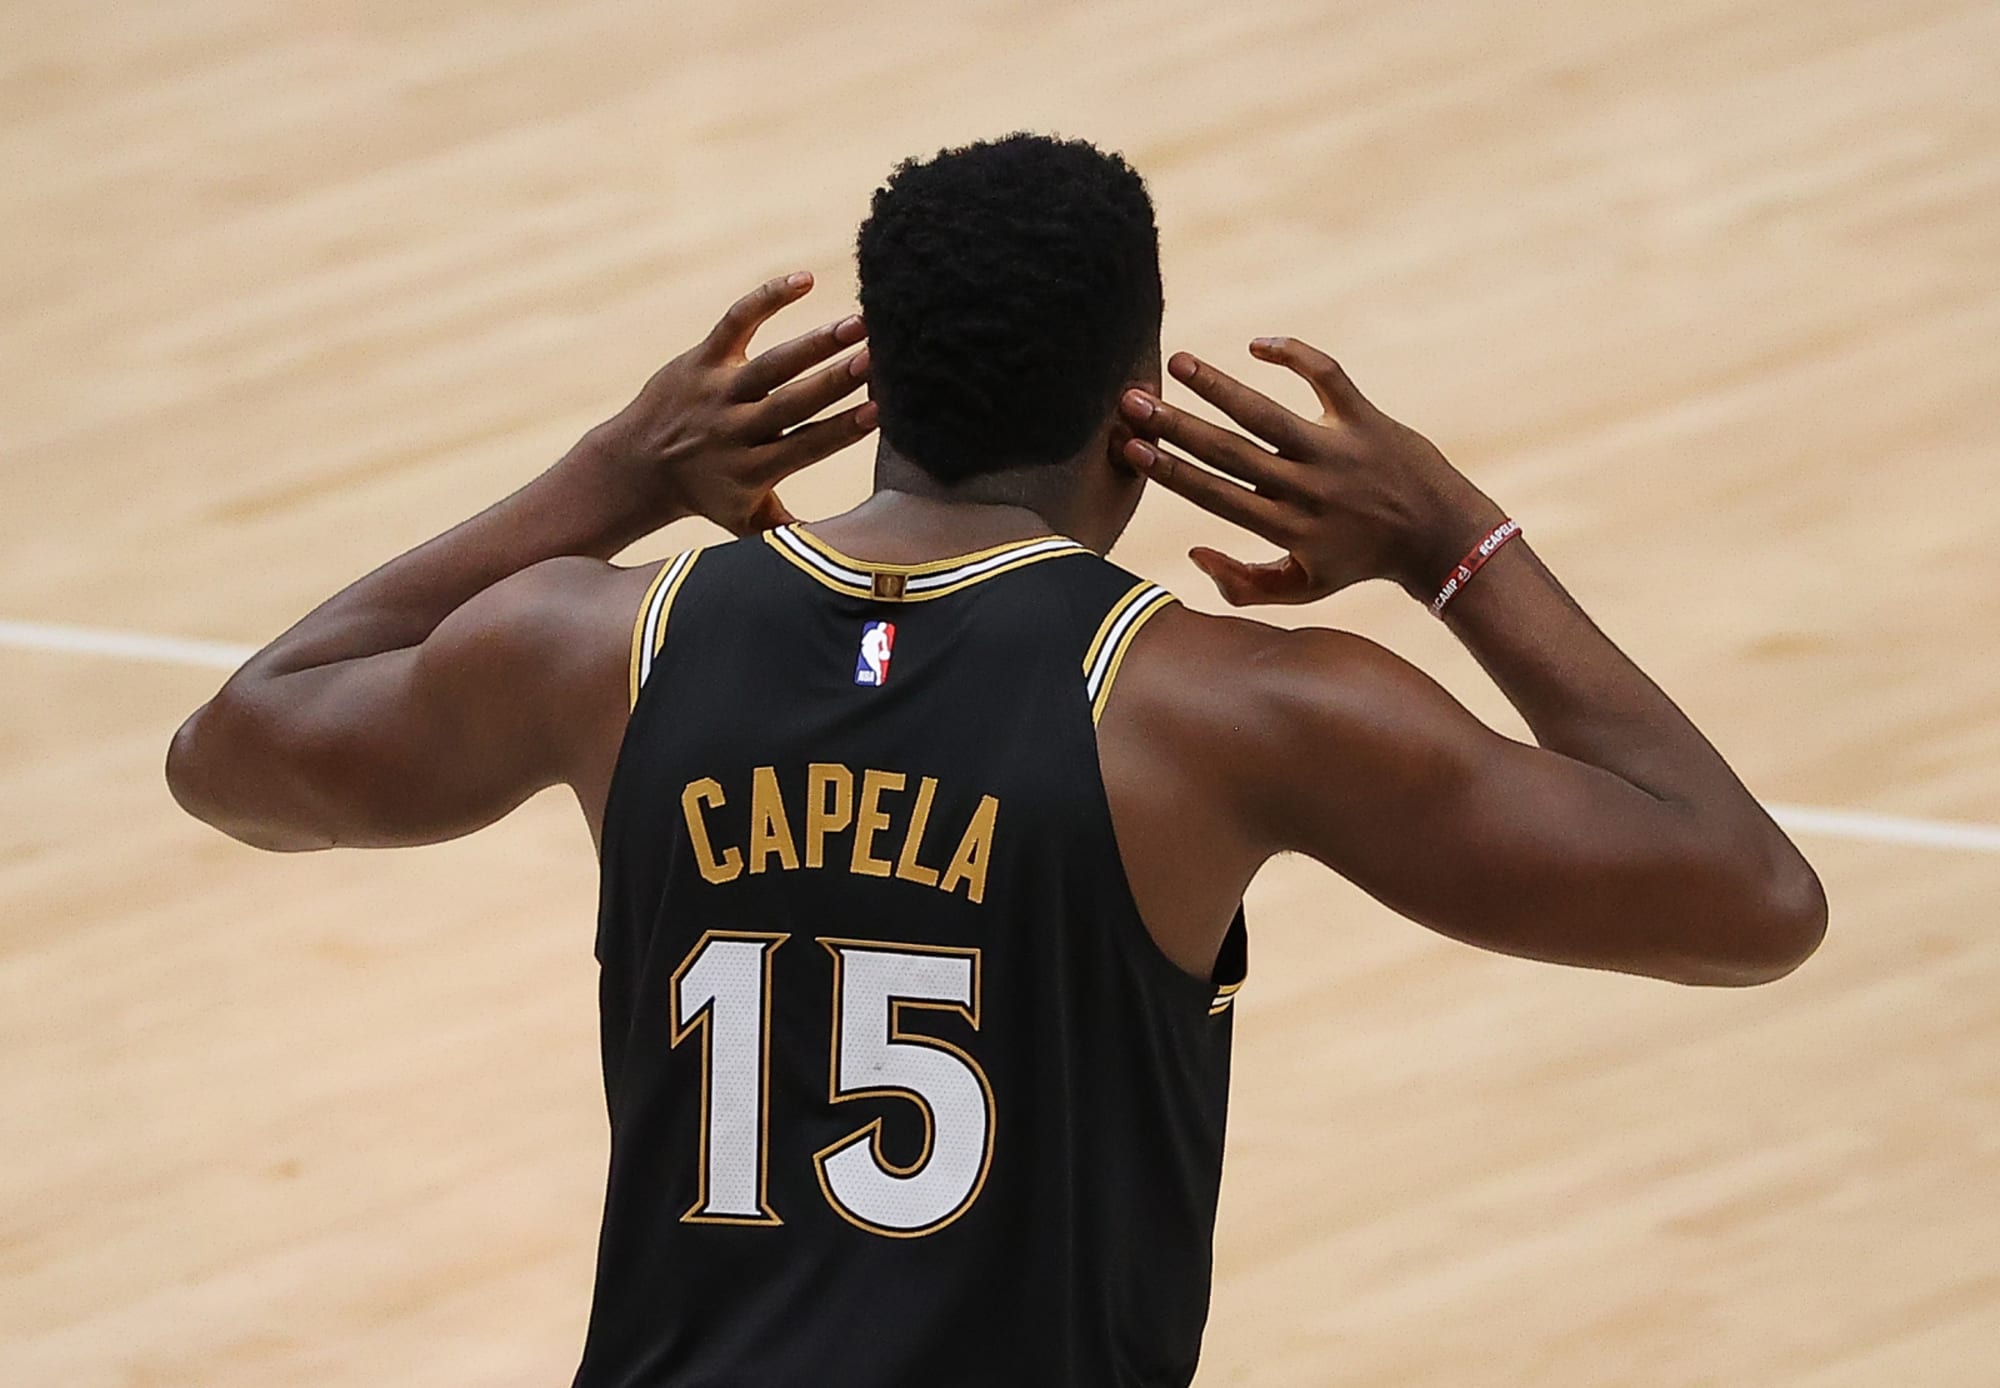 Hawks' Clint Capela: 'A Black person has a voice, and we're all human